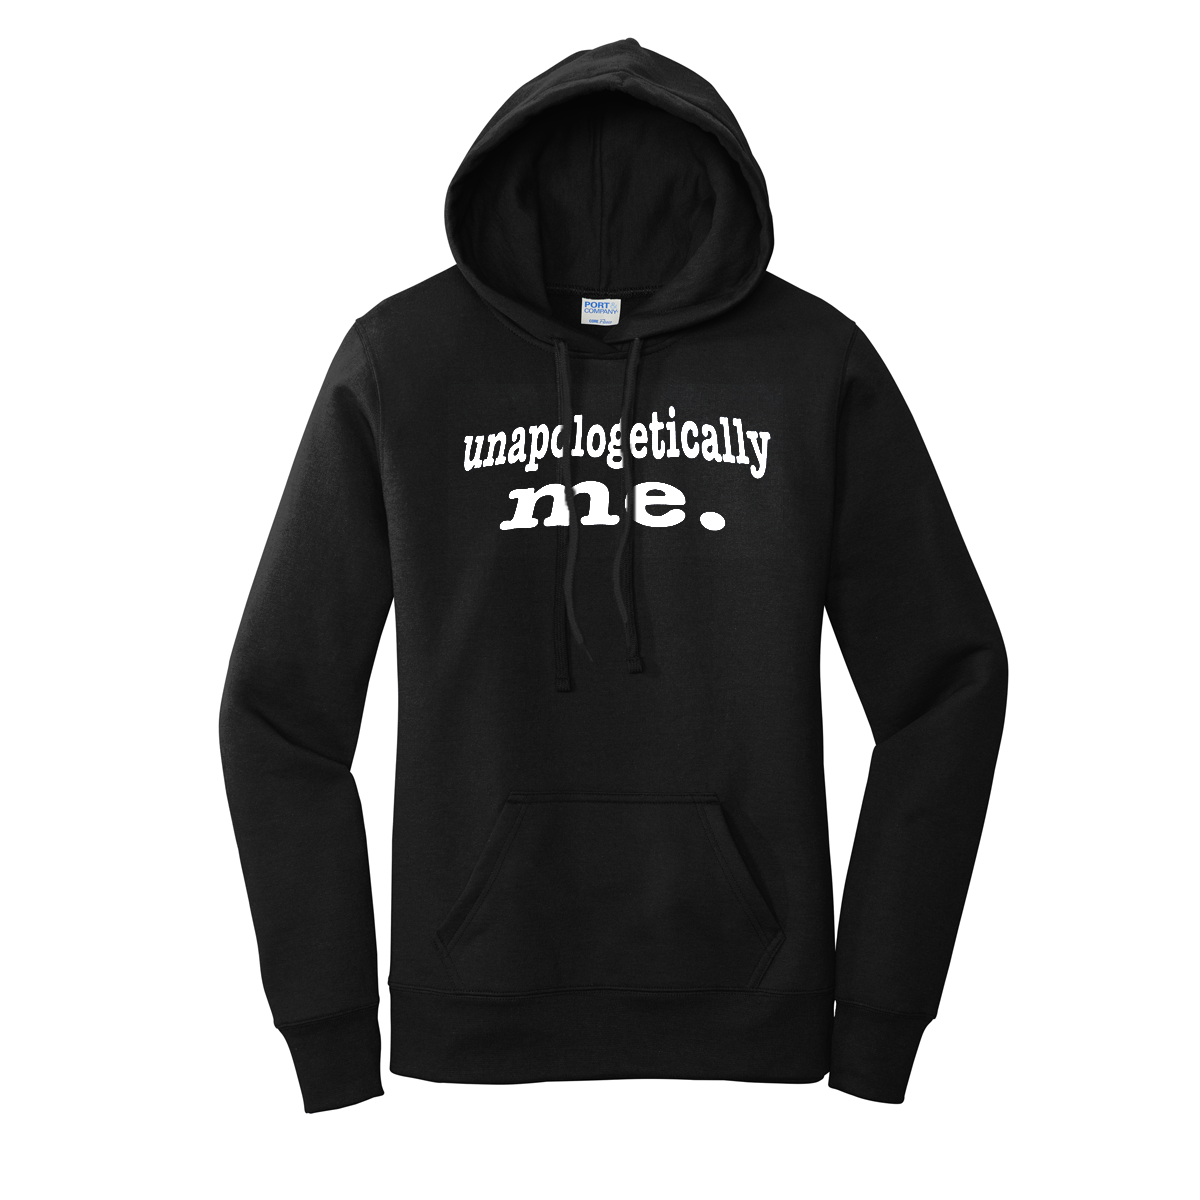 'Unapologetically Me' Women's Hoodie